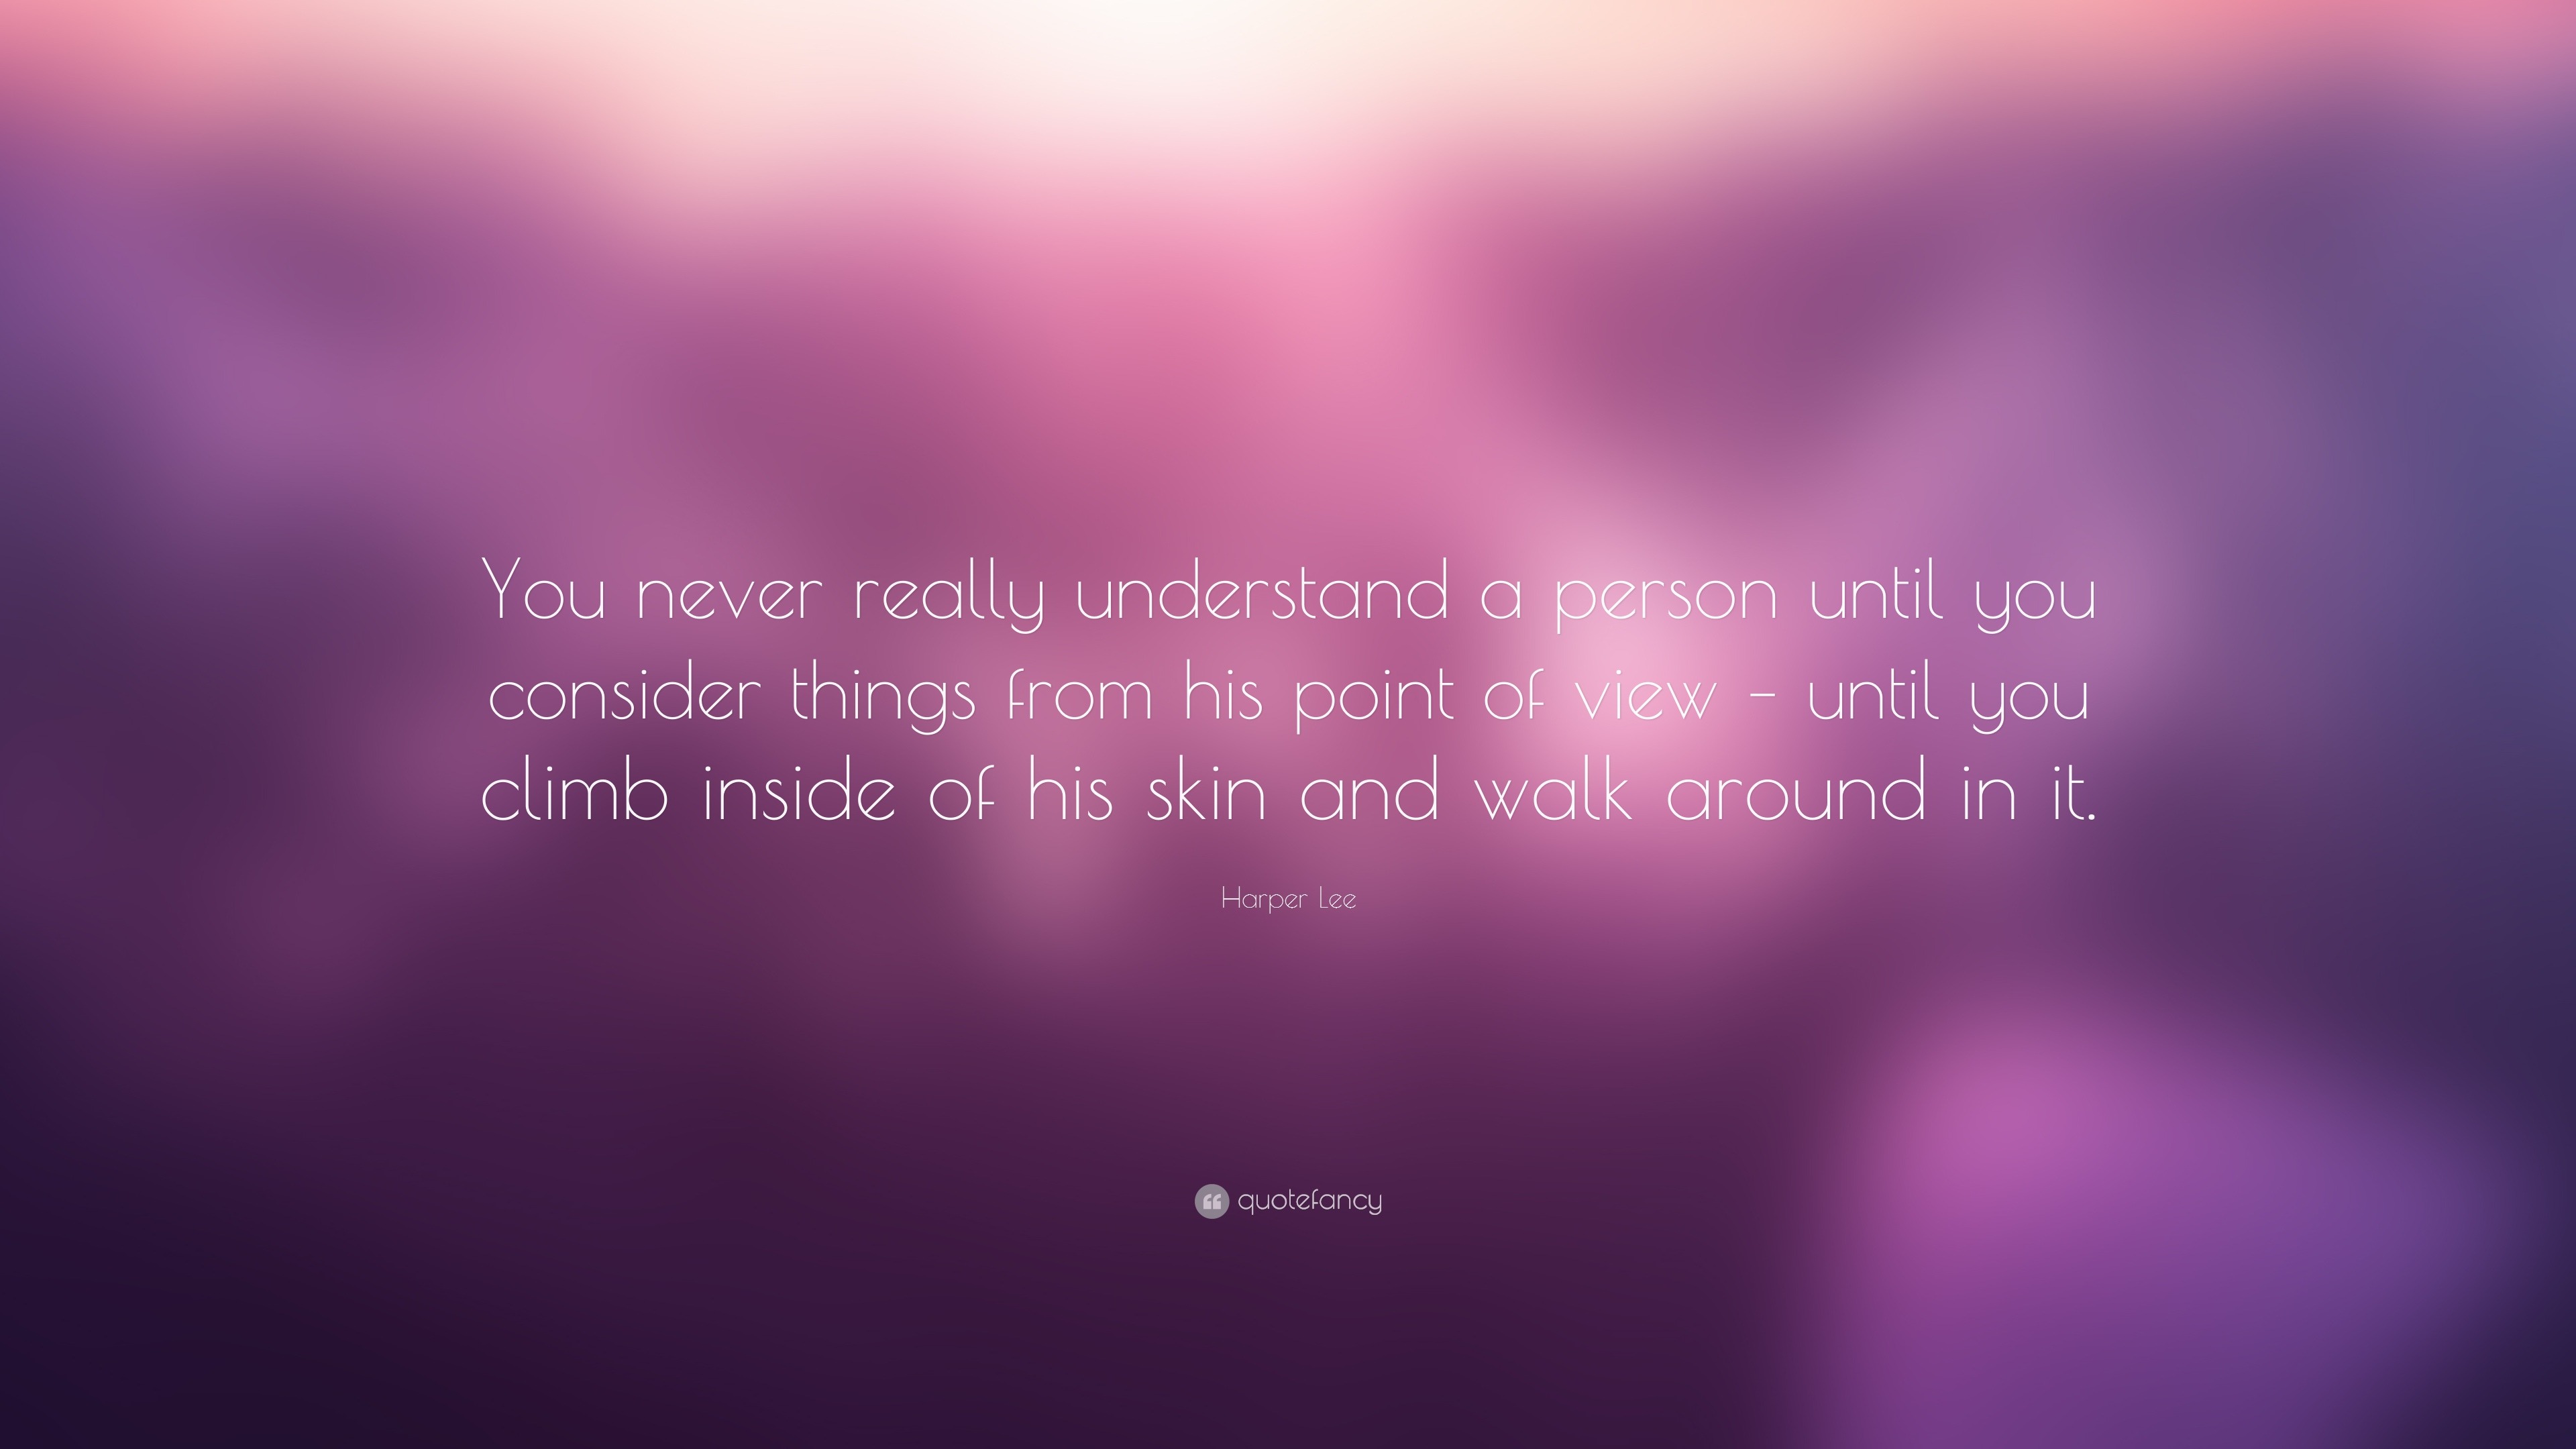 Harper Lee Quote: “You never really understand a person until you ...